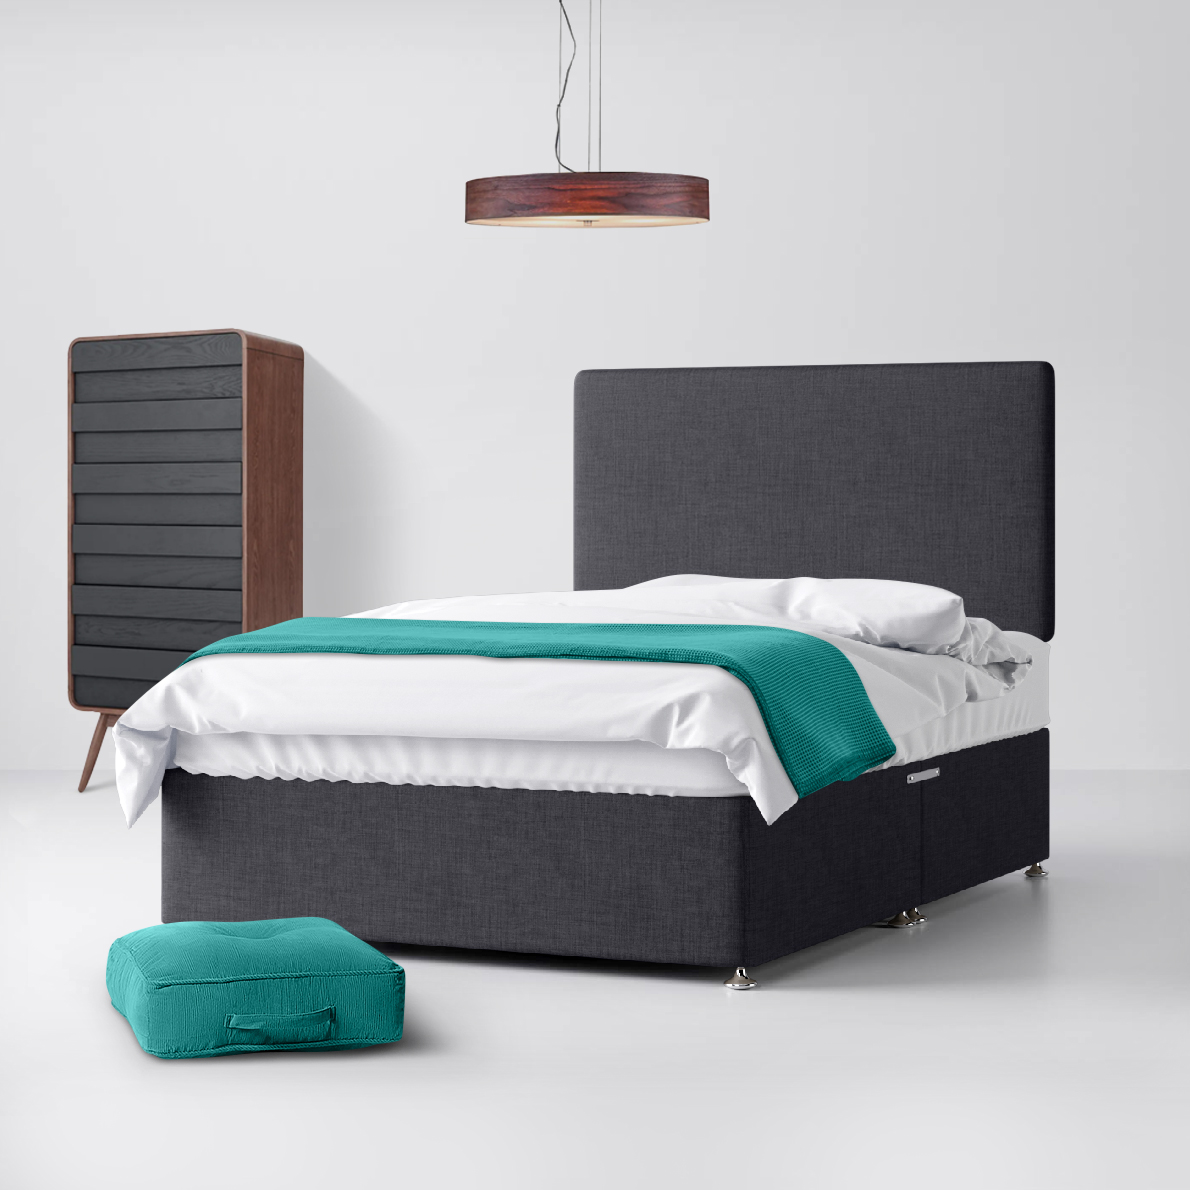 Super King Size - Divan Bed and Cornell Plain Headboard - Dark Grey - Charcoal - Fabric - 6ft - Happy Beds